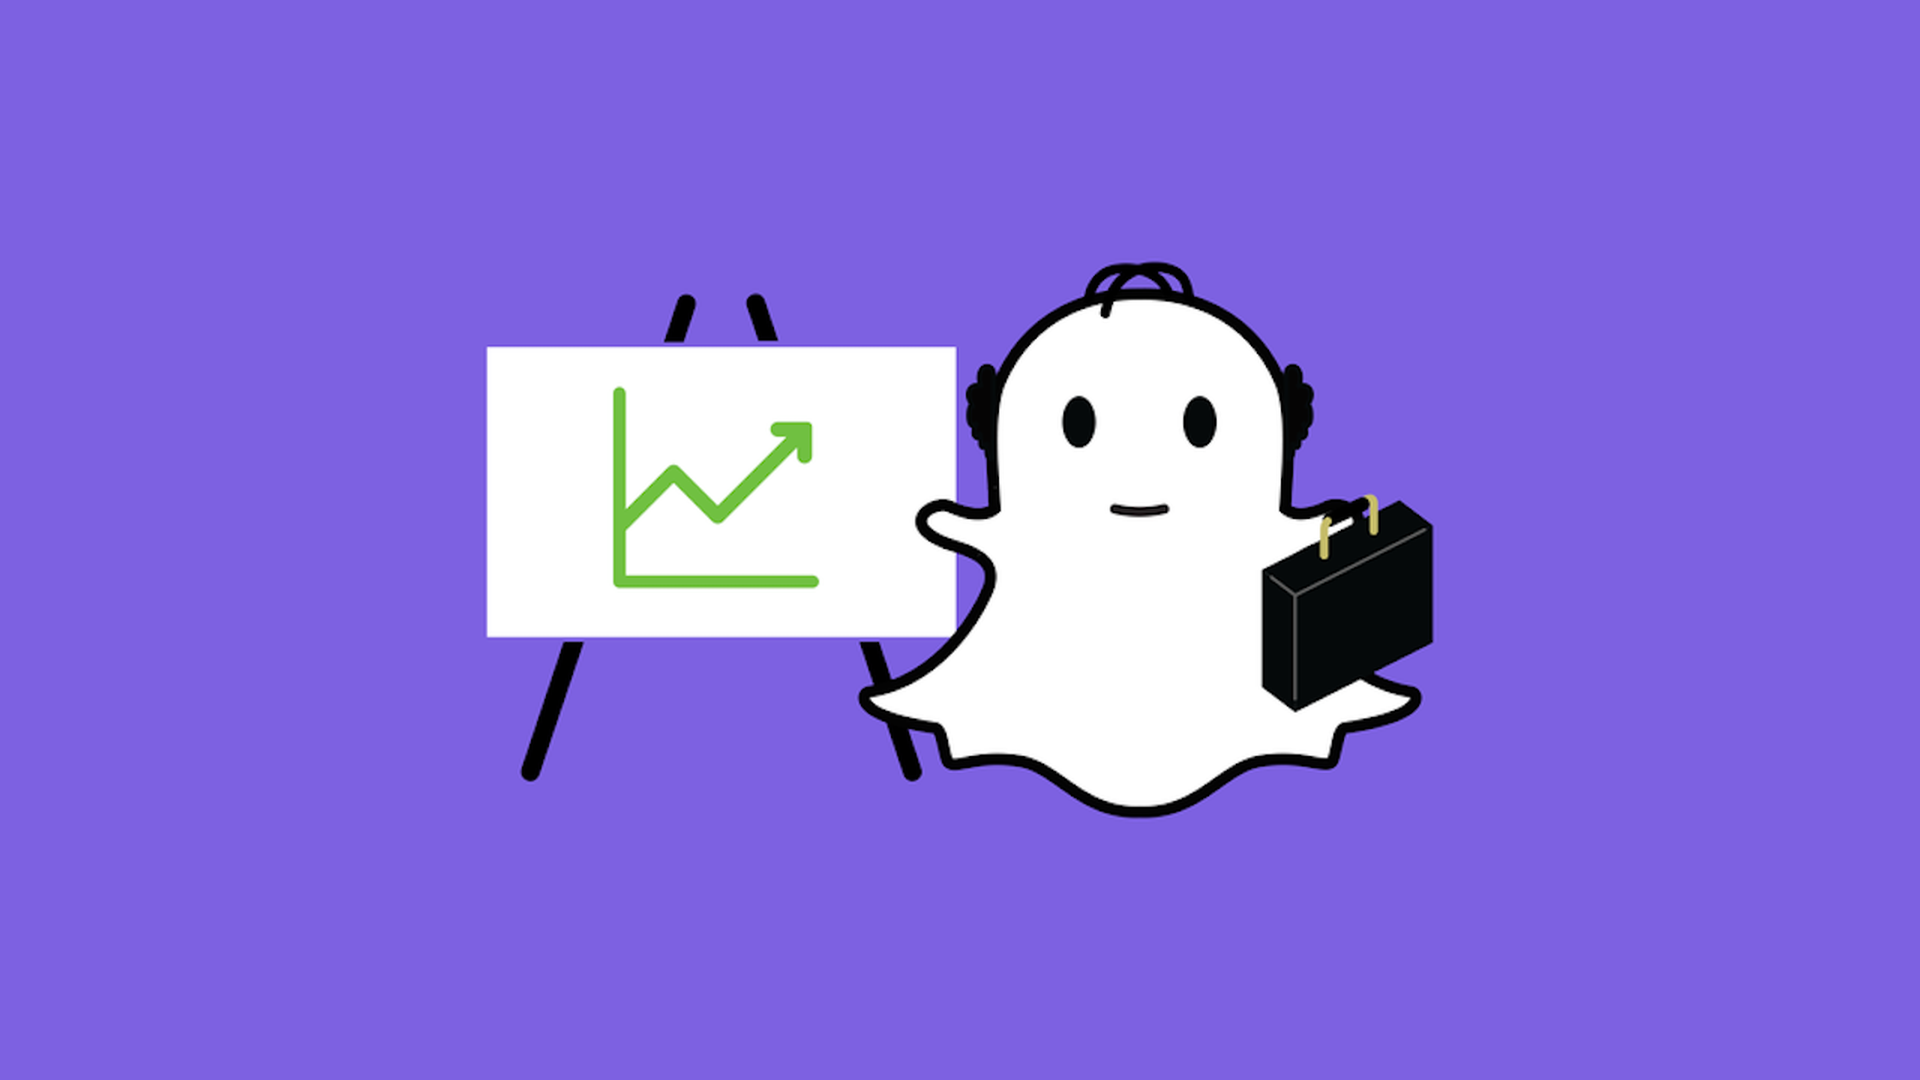 The Snapchat ghost with a stock chart going up